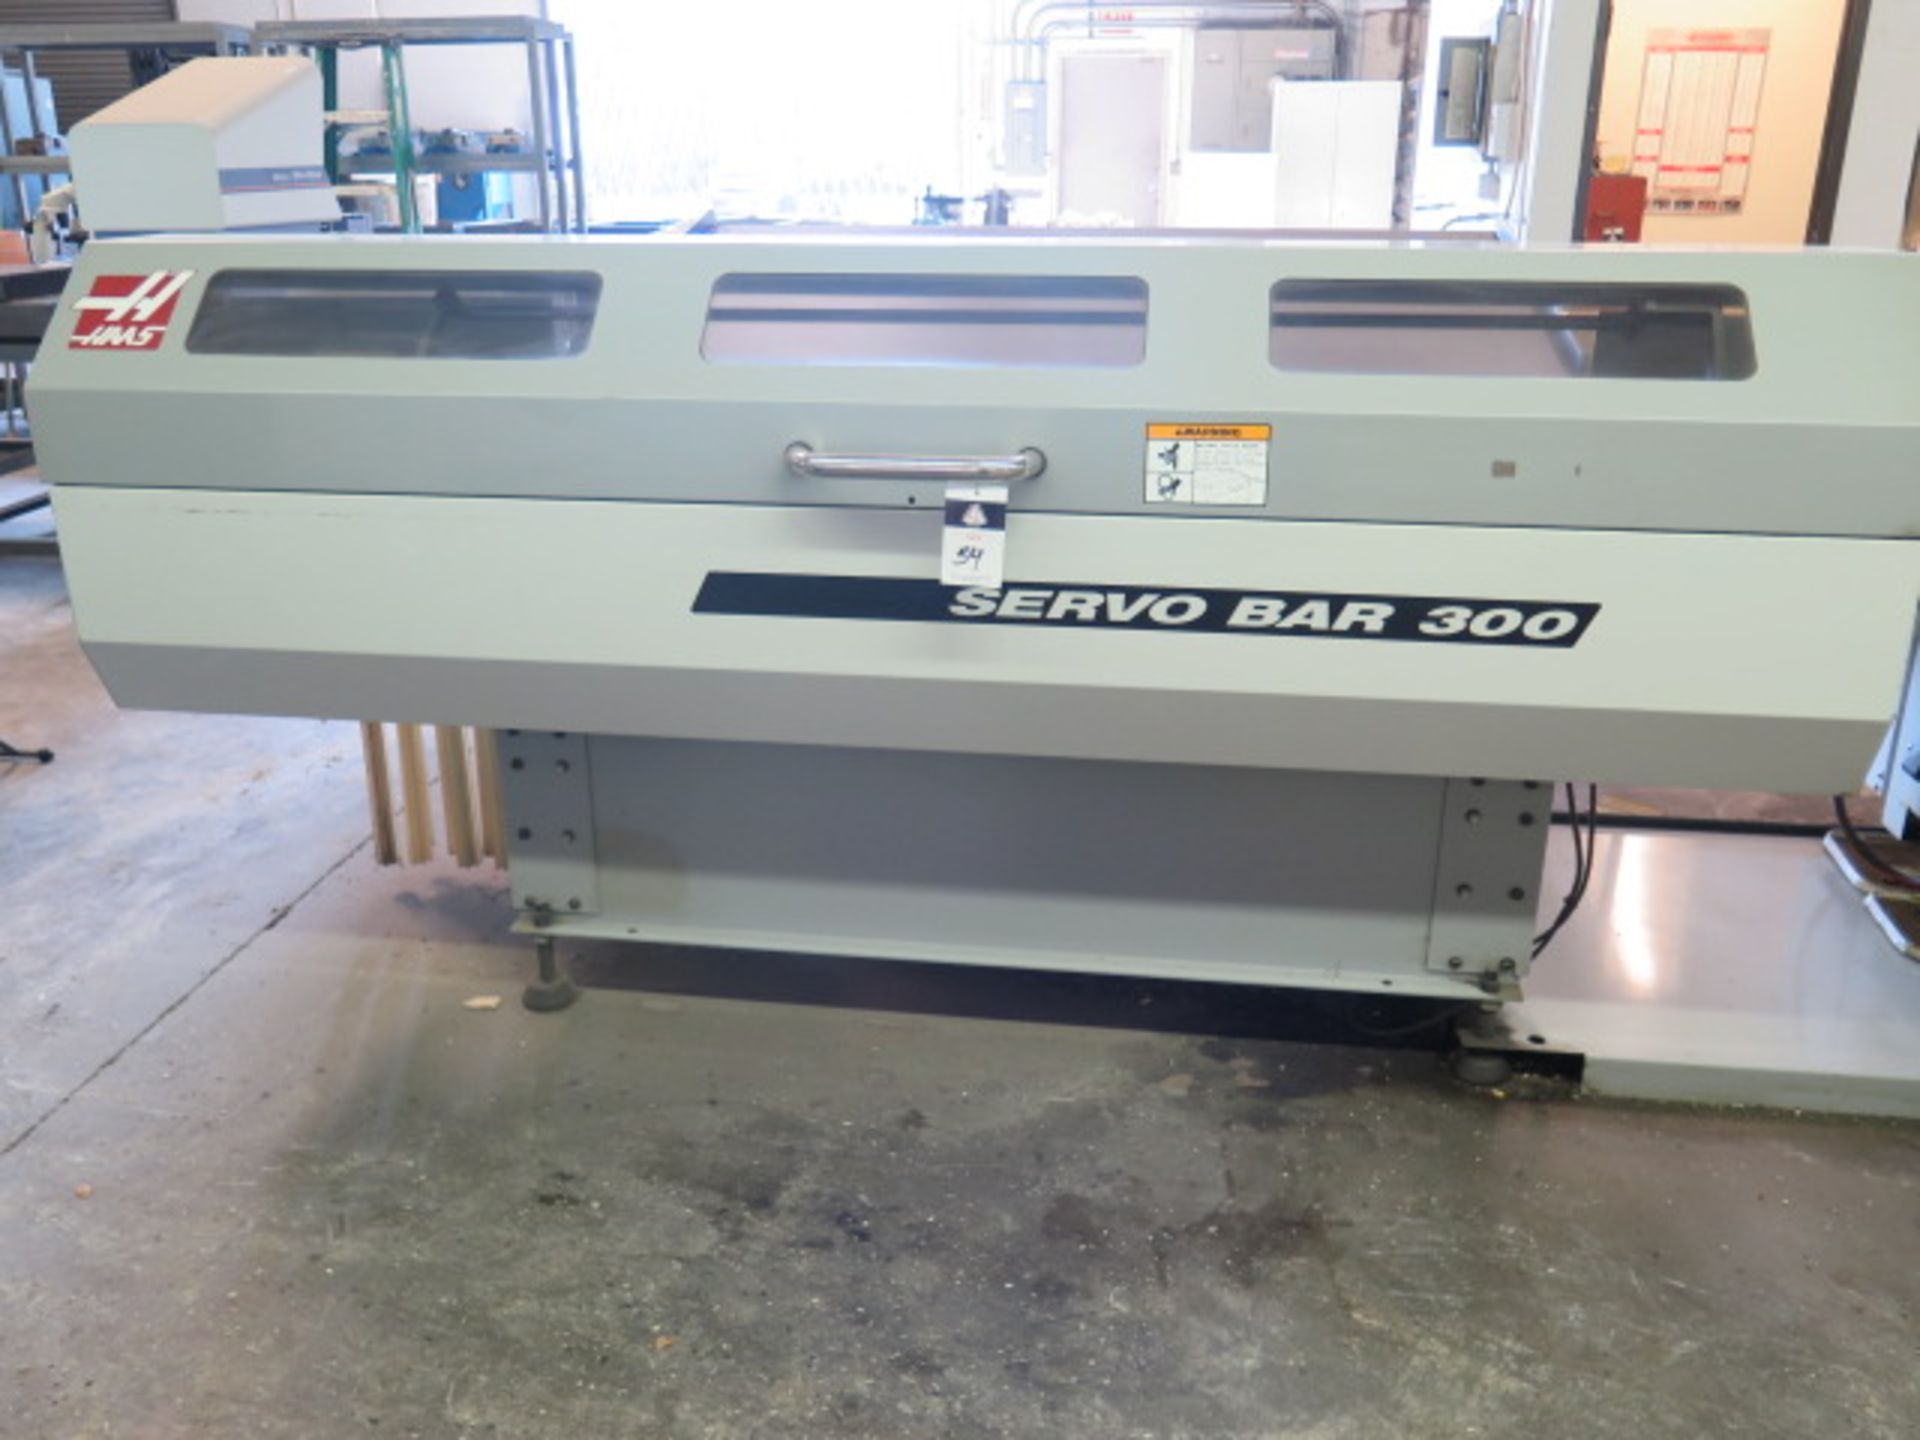 Haas Servobar 300 Automatic Bar Loader / Feeder s/n 92045 w/ Spindle Liner Set (SOLD AS-IS - NO WARR